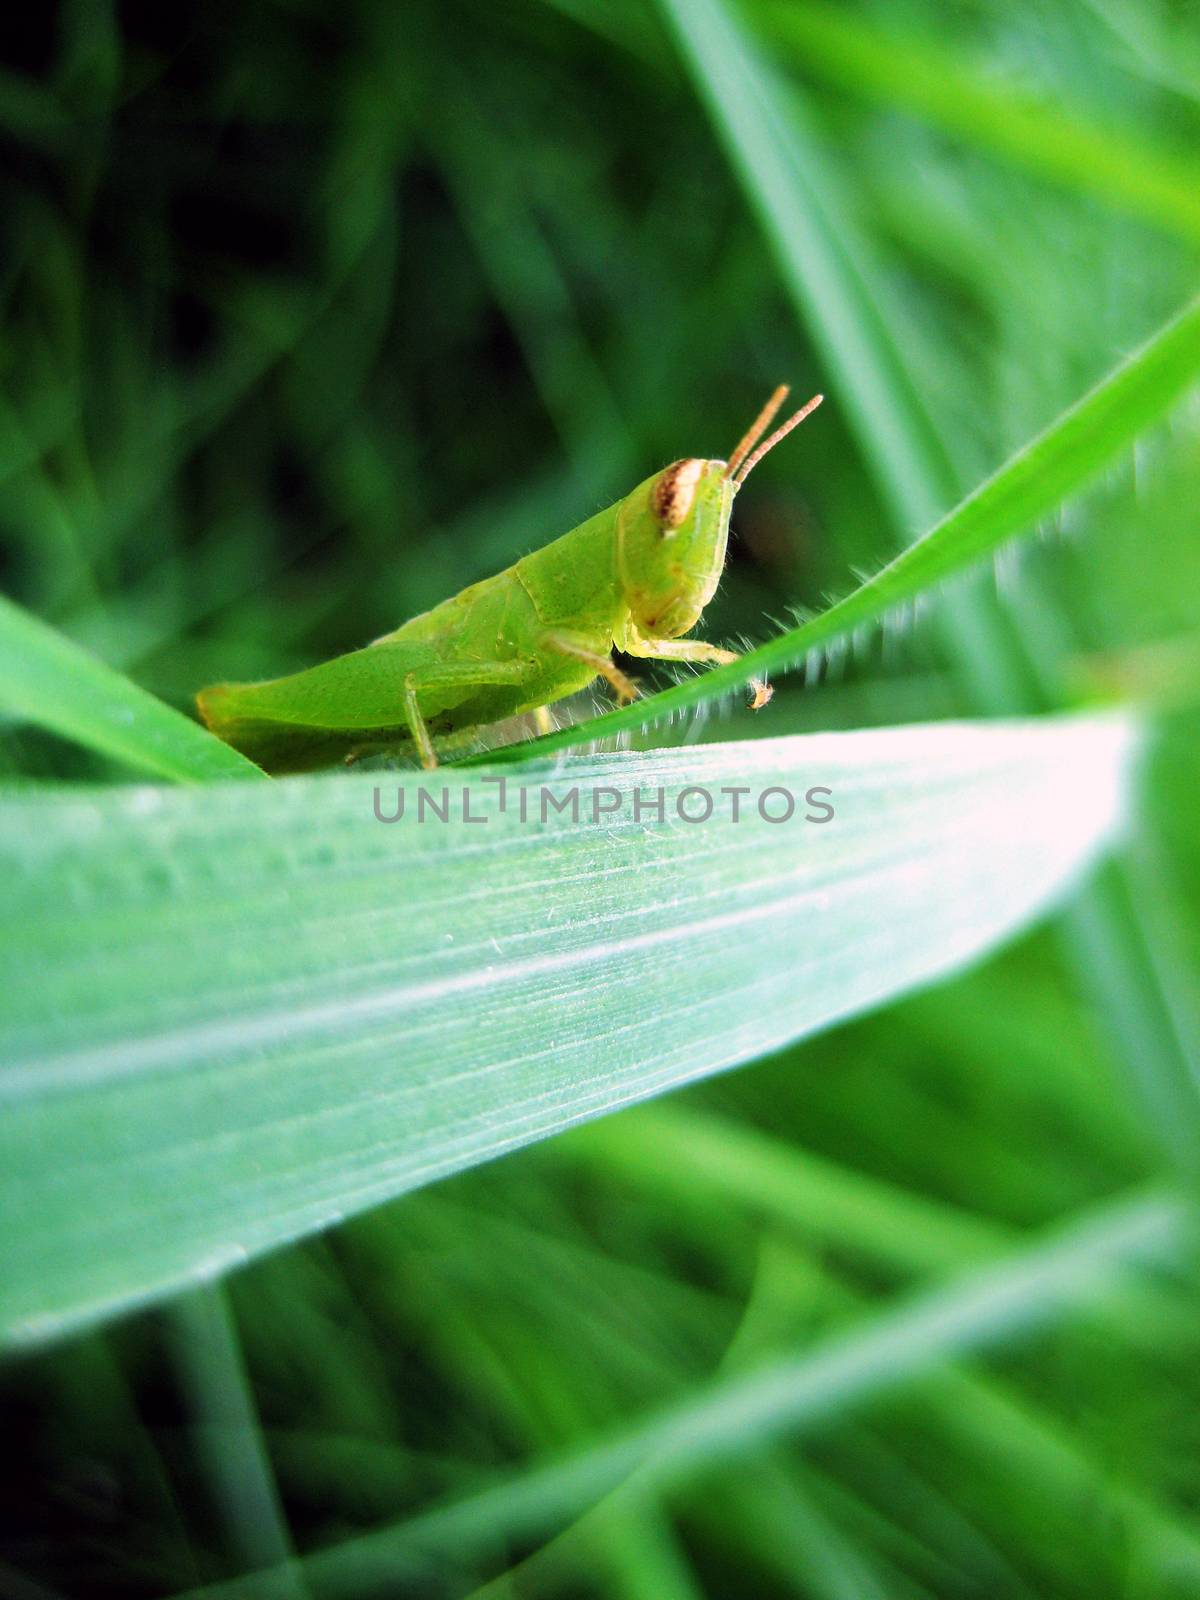 Green grasshopper is in the middle of the green yard.